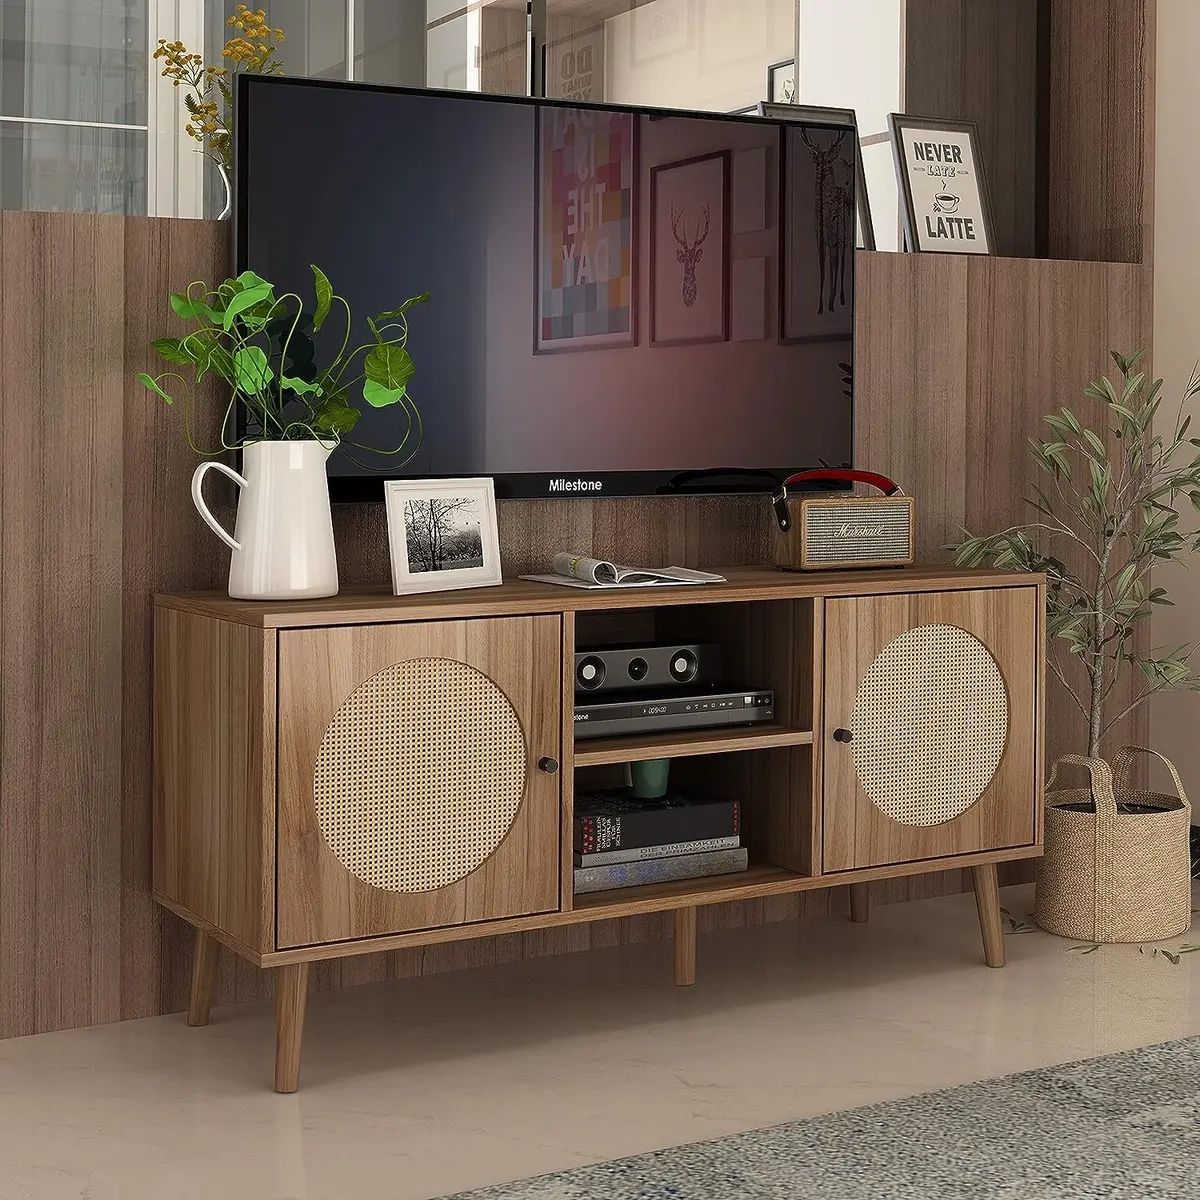 Orrd Farmhouse Rattan Tv Stand For Tvs Up To 52 Inch, 43.3 Walnut | Ebay Throughout Farmhouse Rattan Tv Stands (Photo 11 of 15)